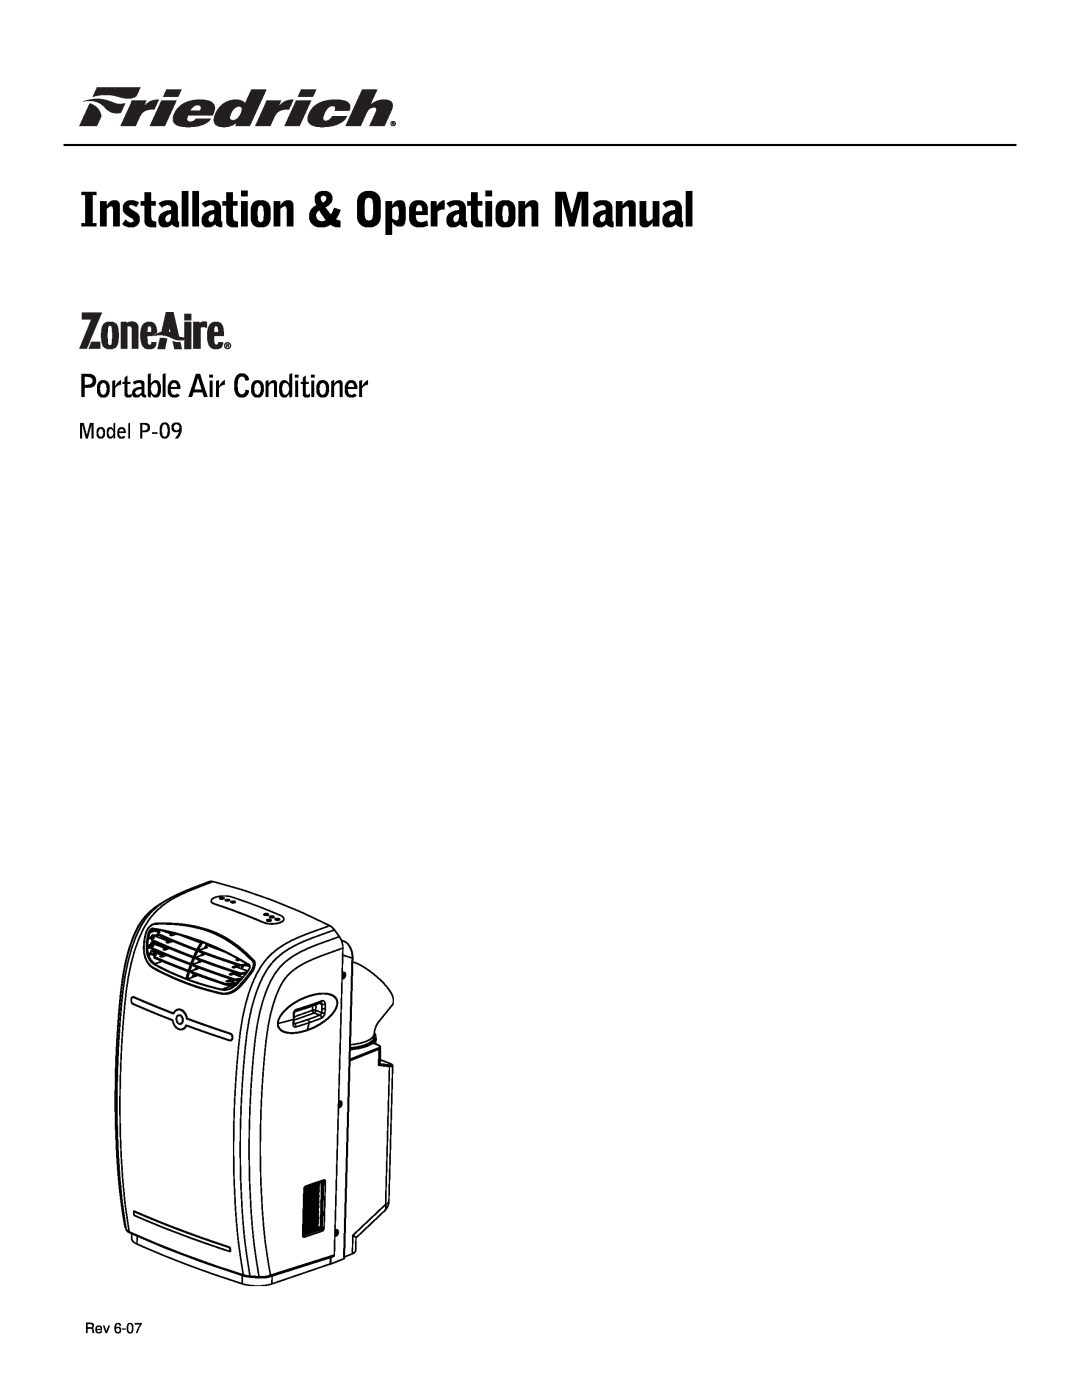 Friedrich operation manual Portable Air Conditioner, Model P-09 